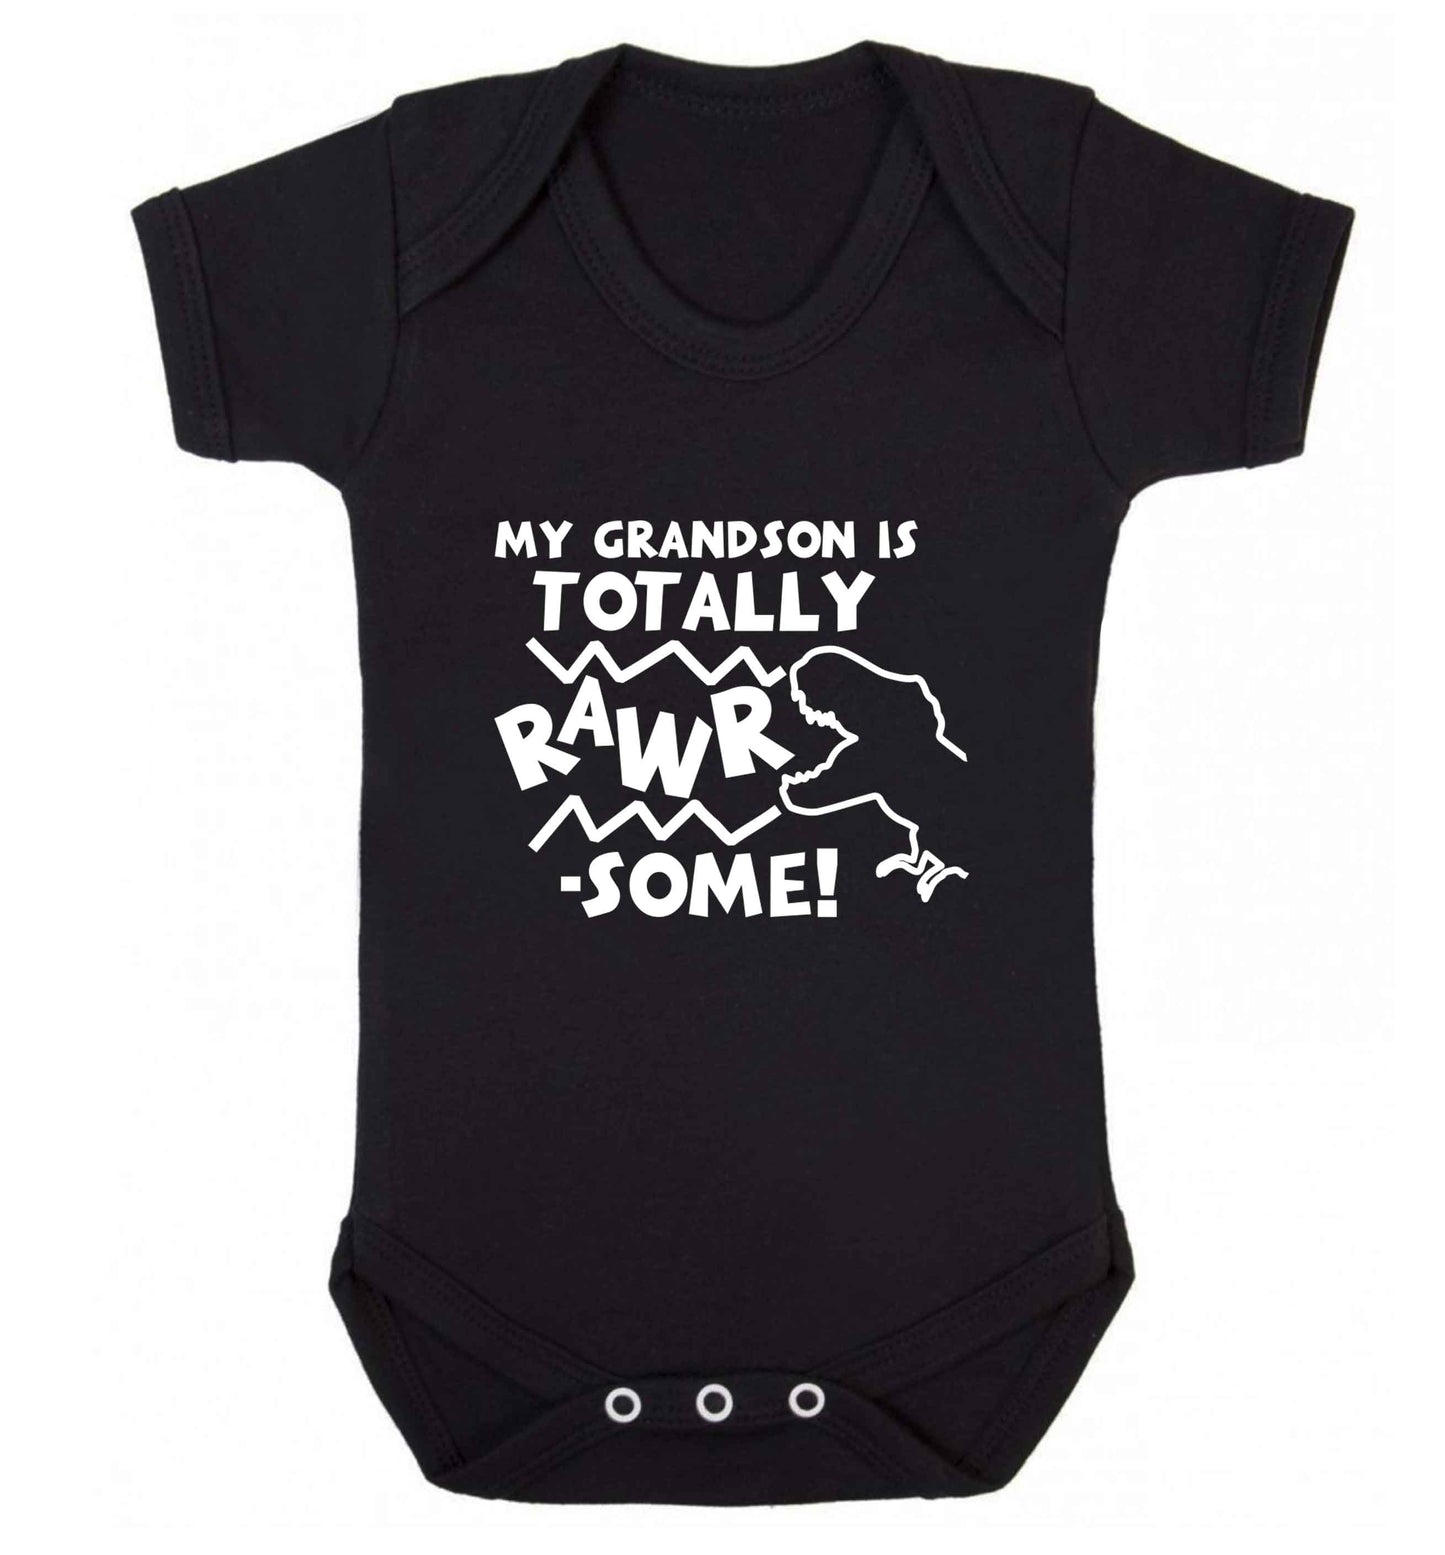 My grandson is totally rawrsome baby vest black 18-24 months